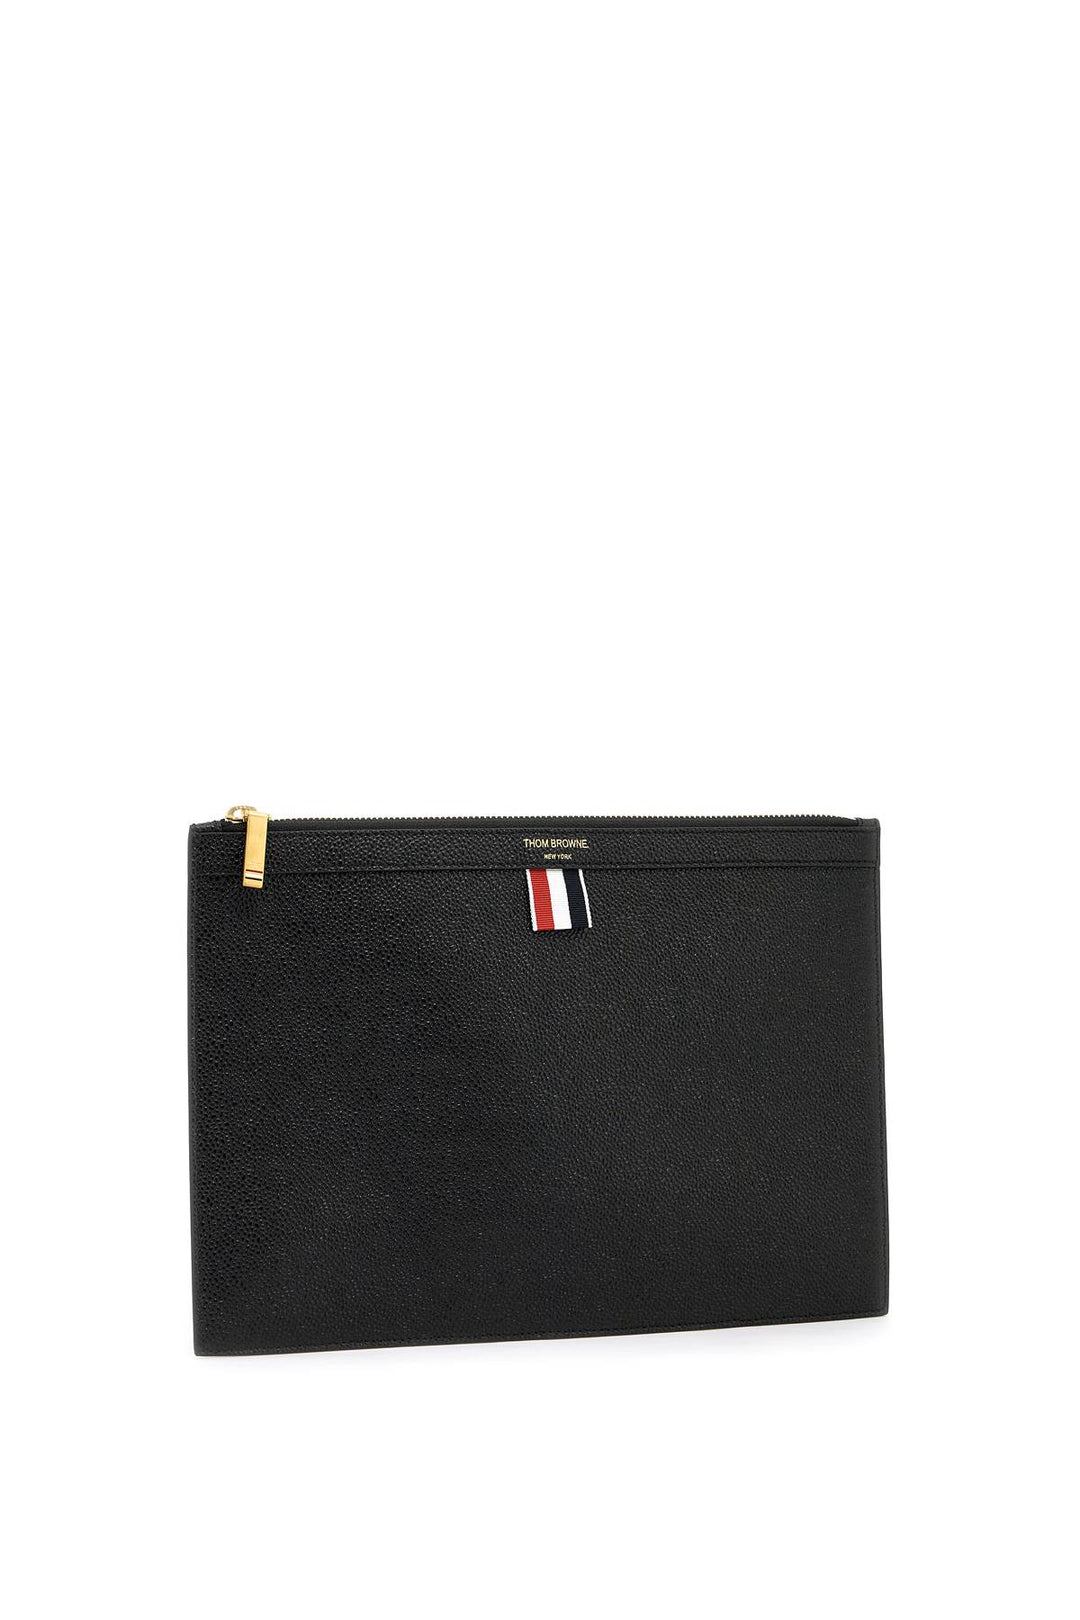 Thom Browne Leather Small Document Holder   Black